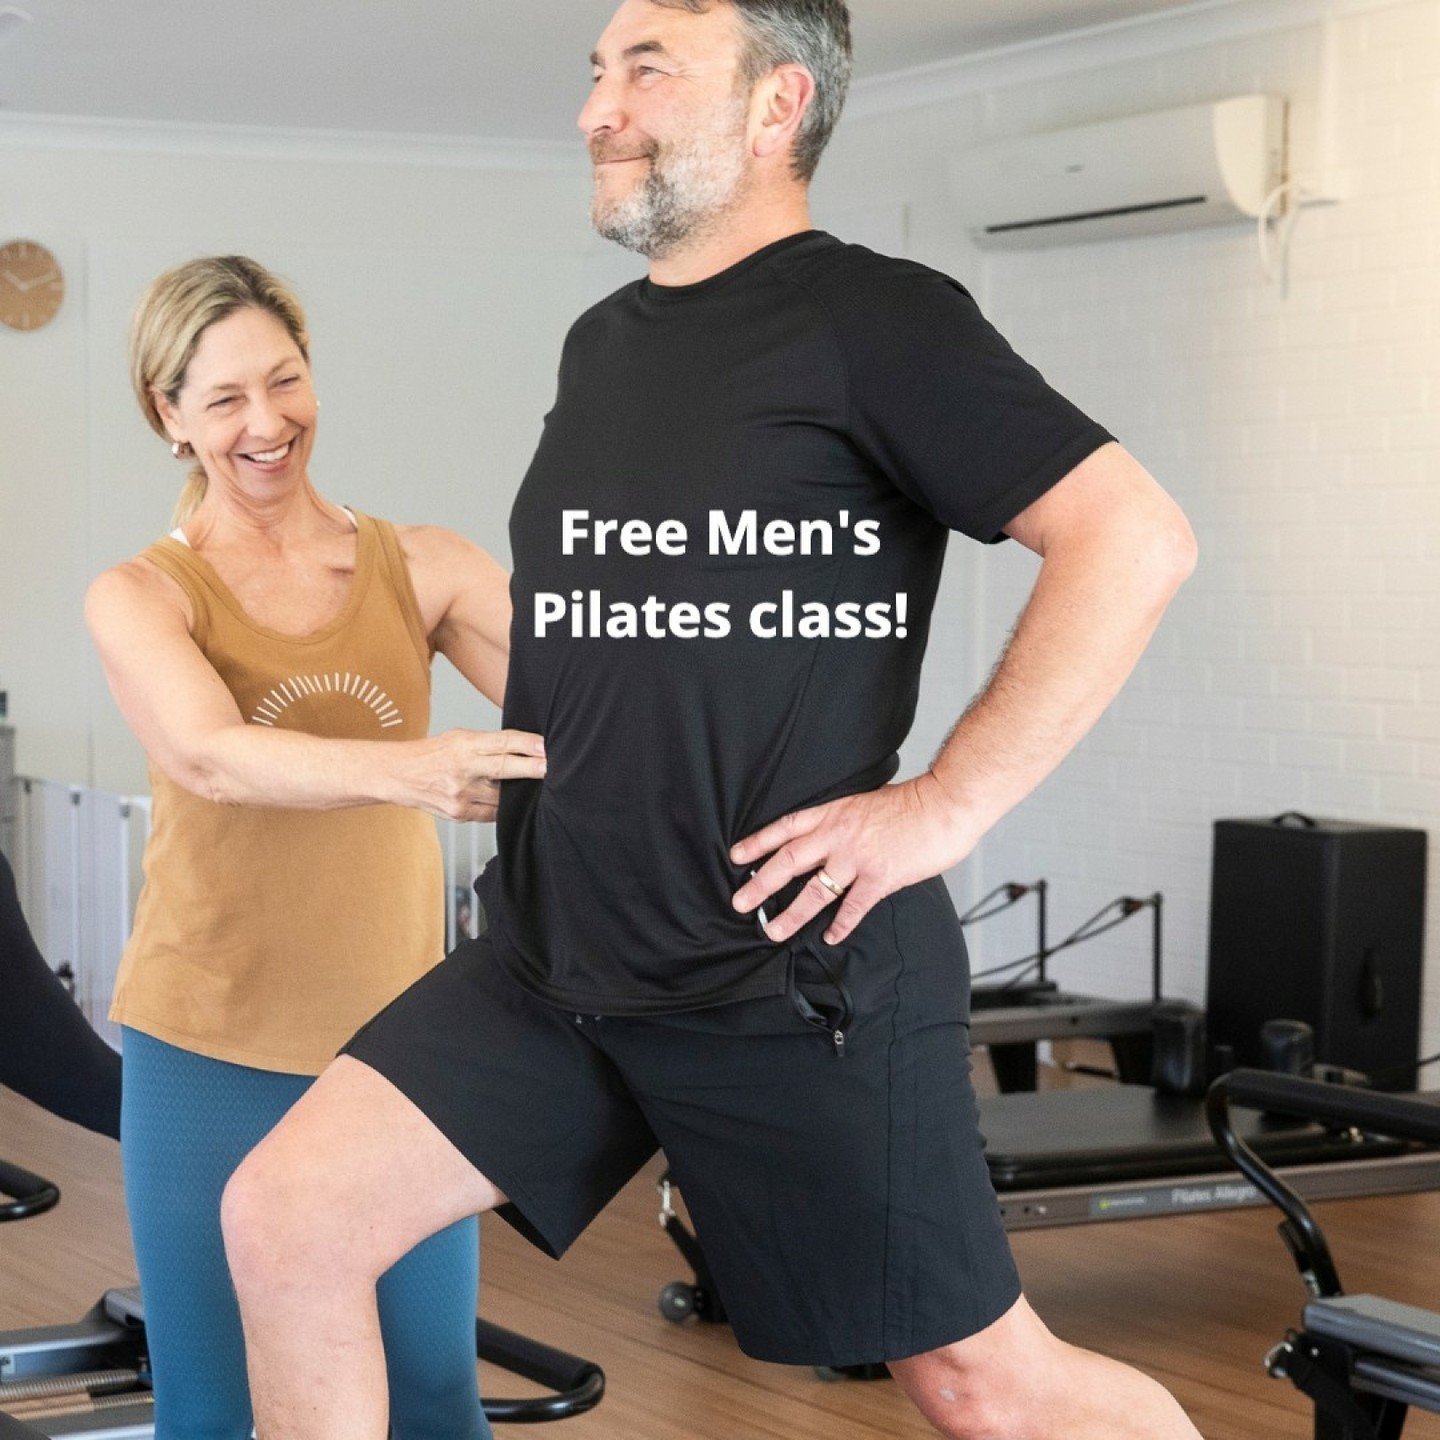 Lads, join us for a FREE reformer class on Thursday the 18th of April at 4pm with Fiona!

Specifically designed with men in mind, including: stretches, strength, core and balance!

Often men train in a way that overemphasizes certain muscles but negl